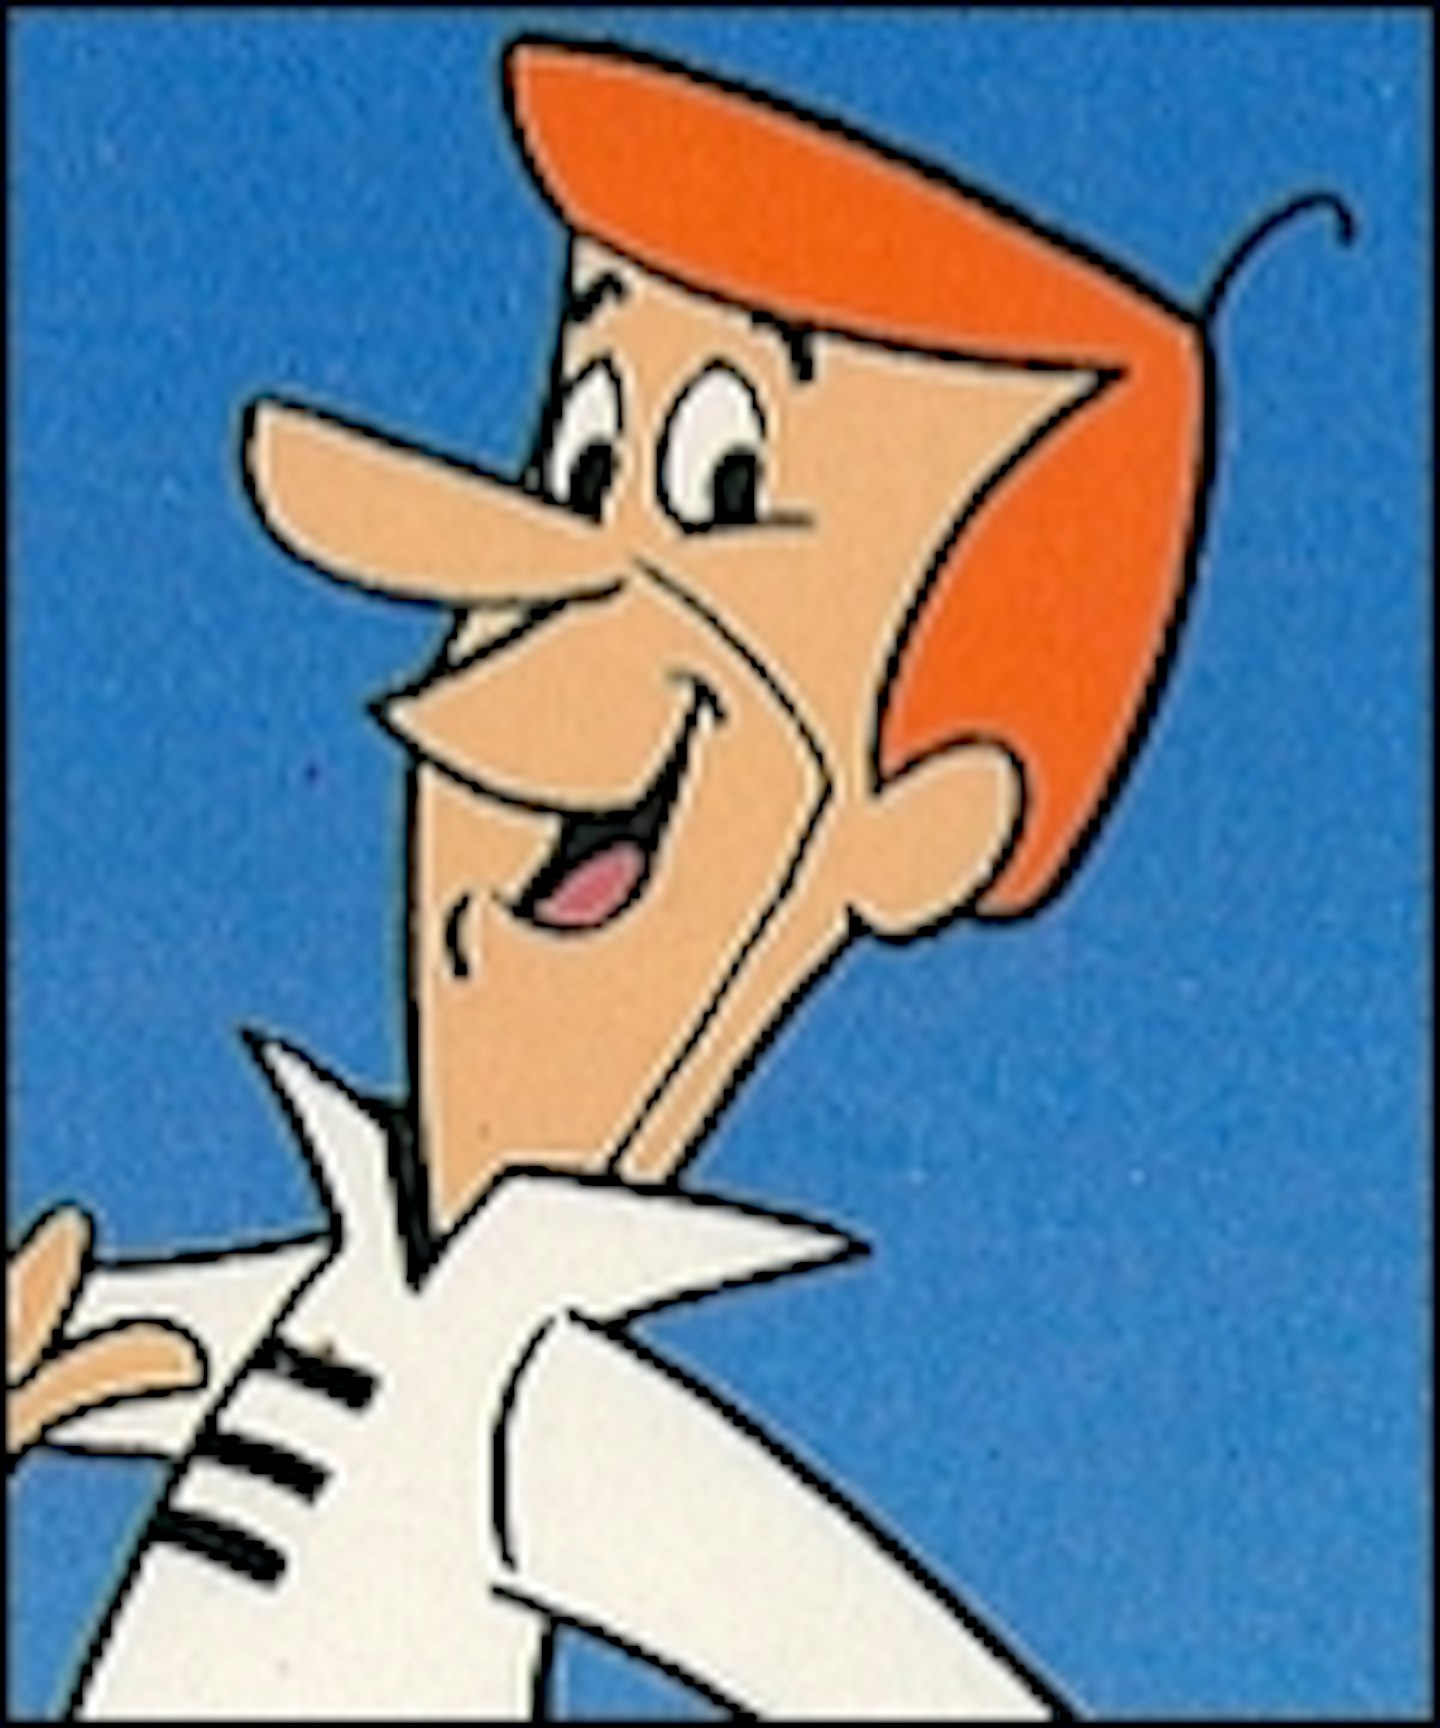 Warner Bros. Aims For The Jetsons Again